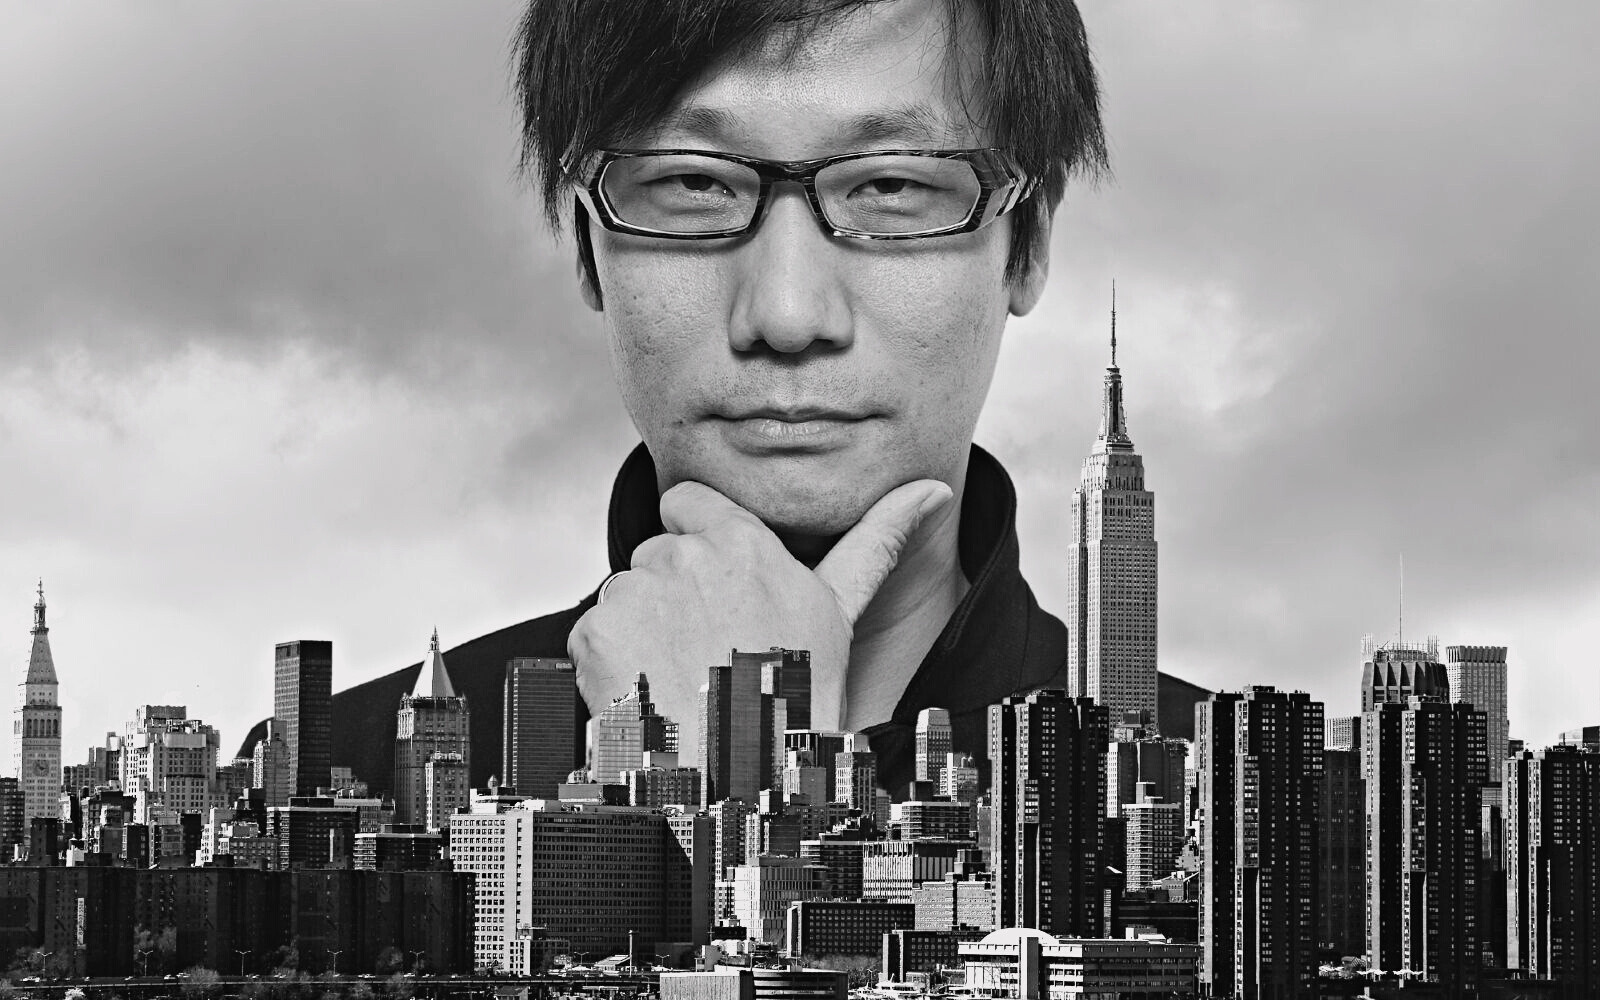 Control' features a wonderfully surreal Hideo Kojima cameo